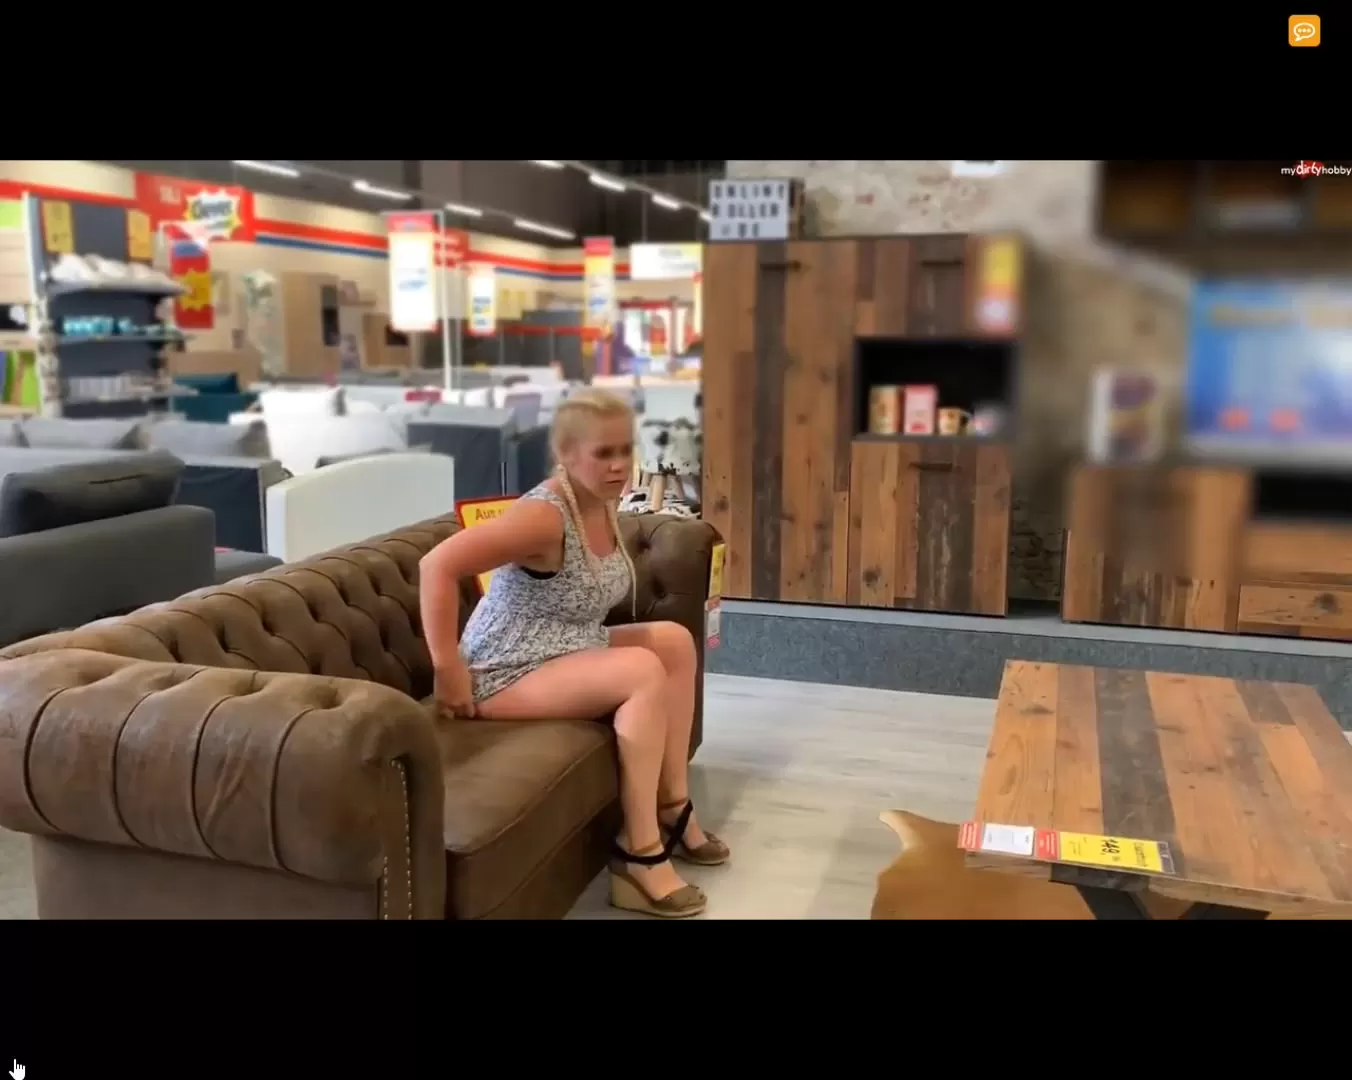 Woman pissing on a couch in furniture market